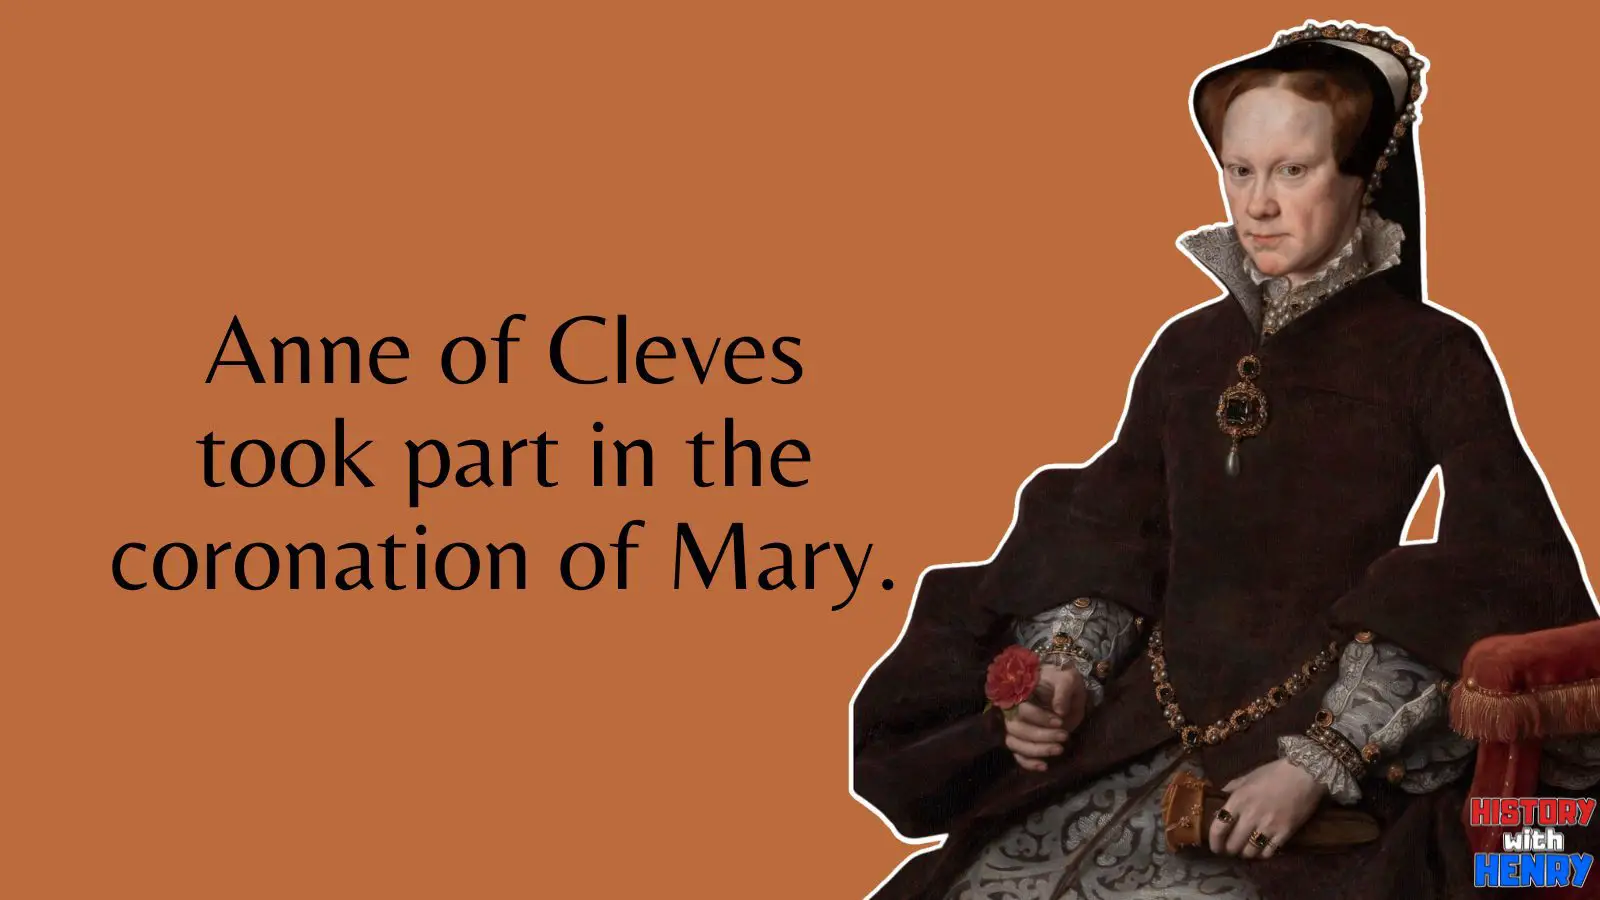 Facts about Anne of Cleves